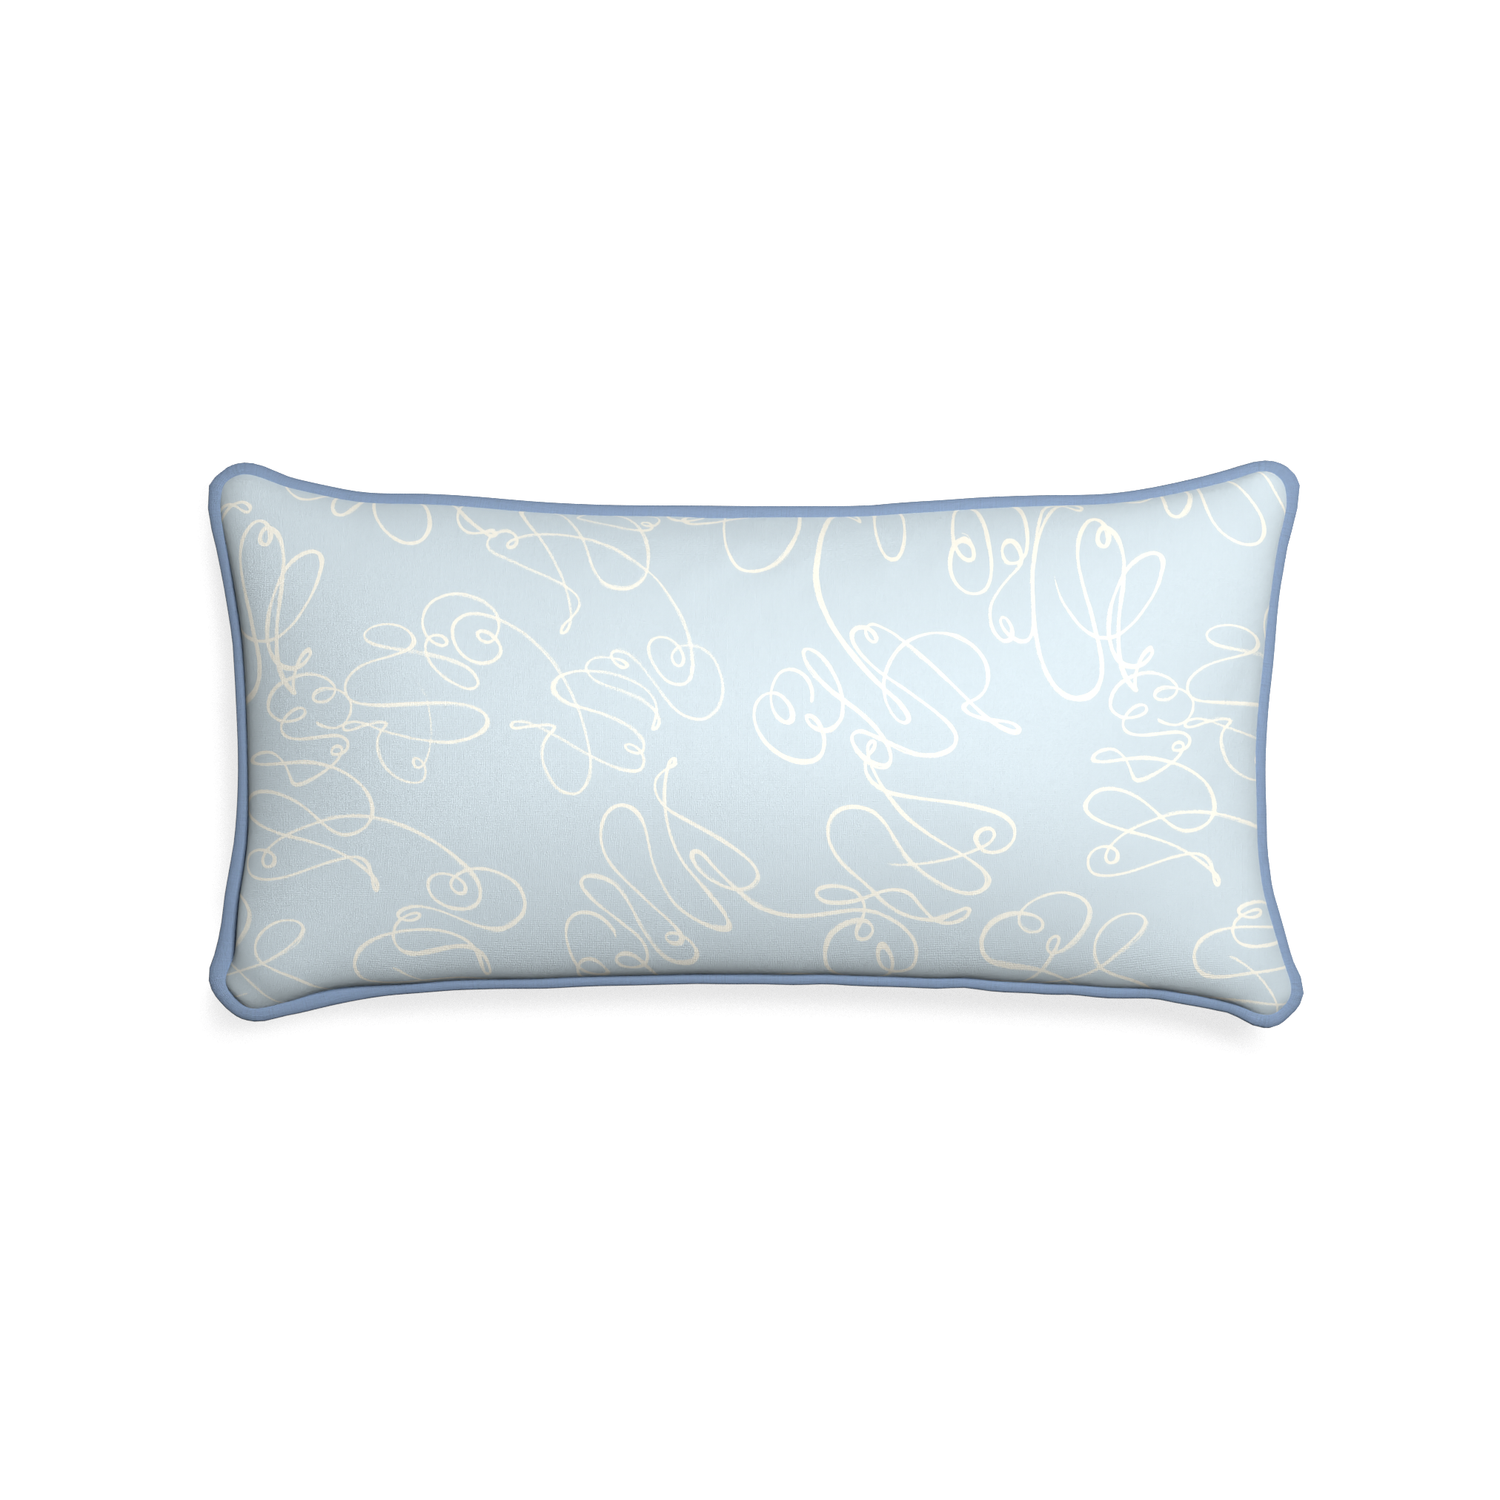 Midi-lumbar mirabella custom powder blue abstractpillow with sky piping on white background